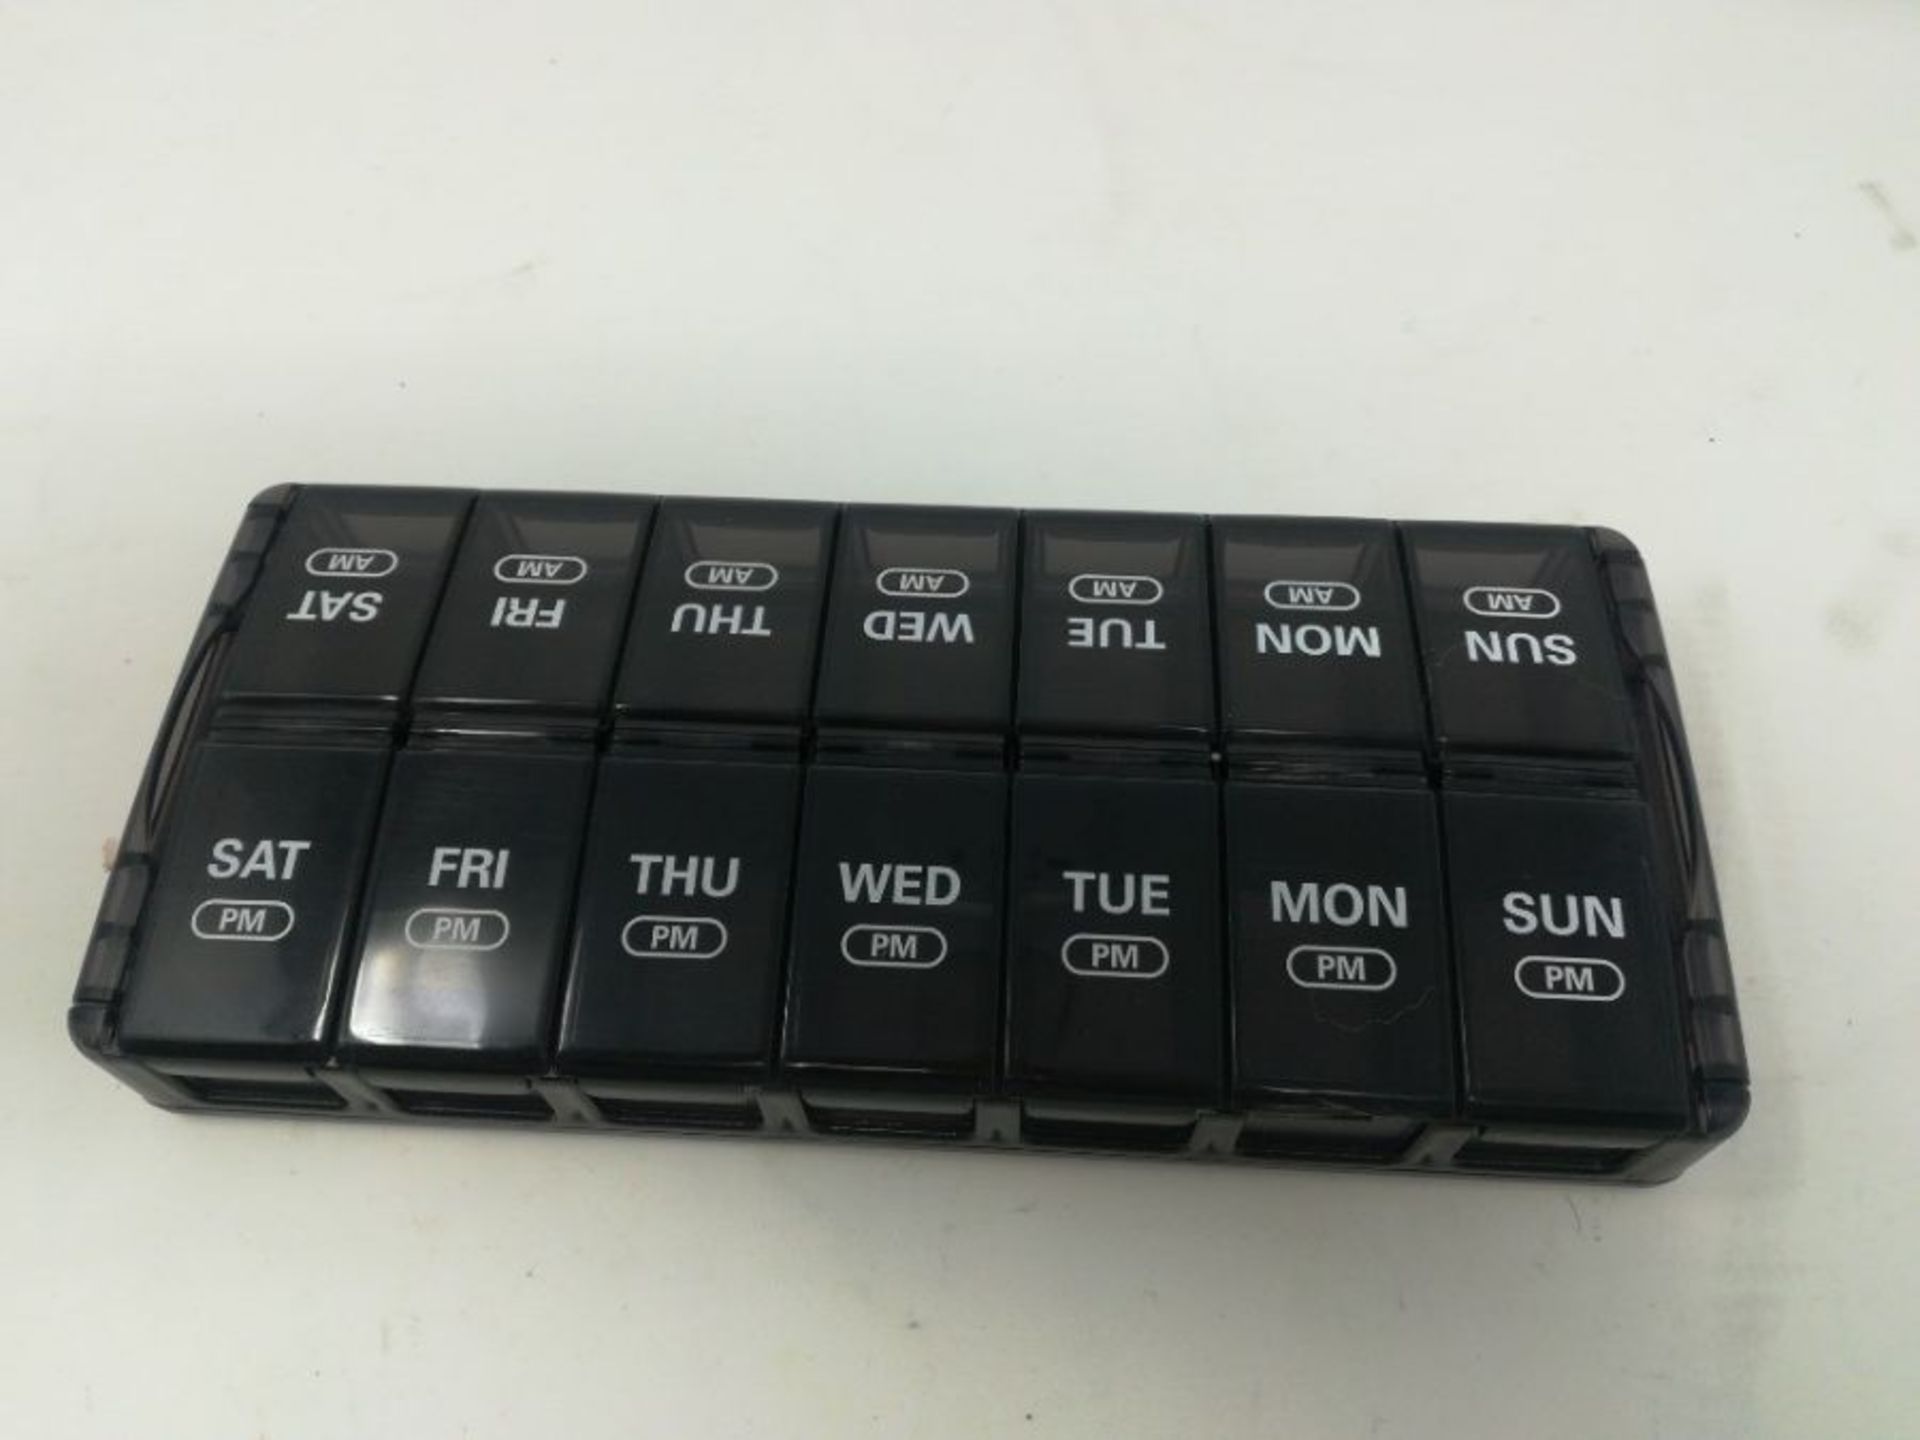 SUKUOS Pill Box 7 Day AM PM (Twice a Day) Quick Fill Weekly Pill Box Case 2020 Version - Image 2 of 2